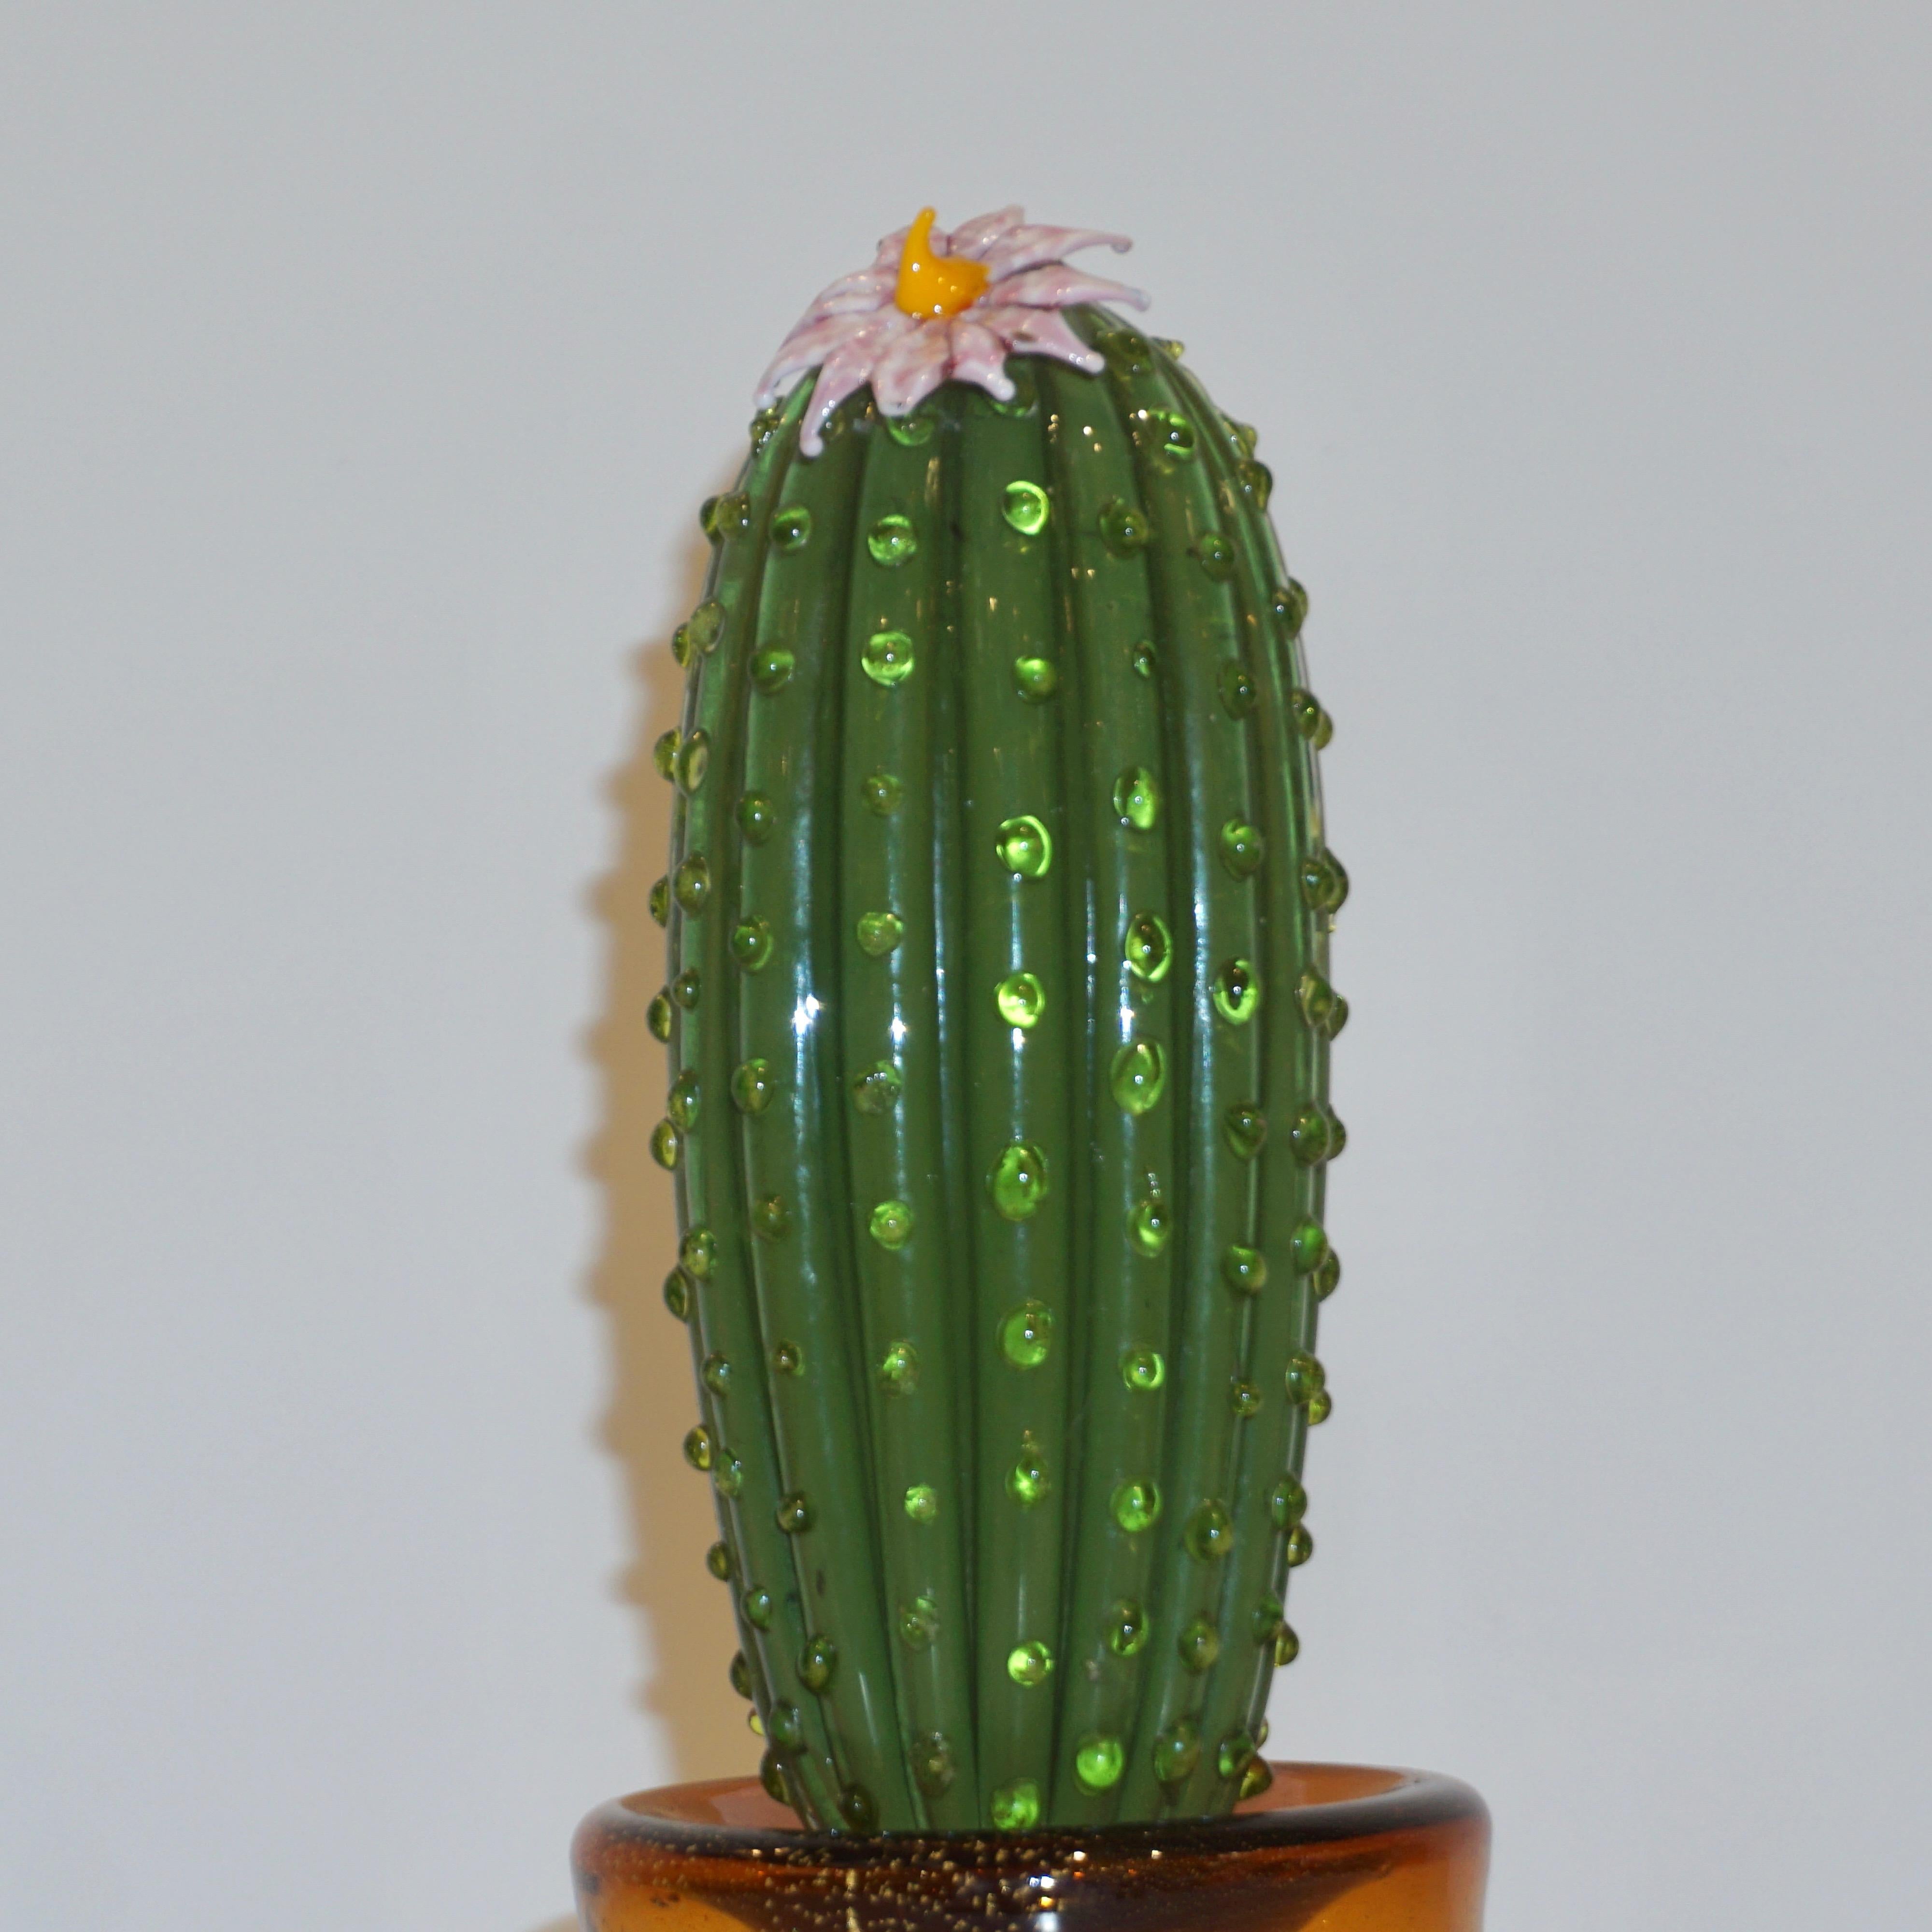 Gold 1990s Vintage Italian Green Murano Glass Tall Cactus Plant with Pink Flower